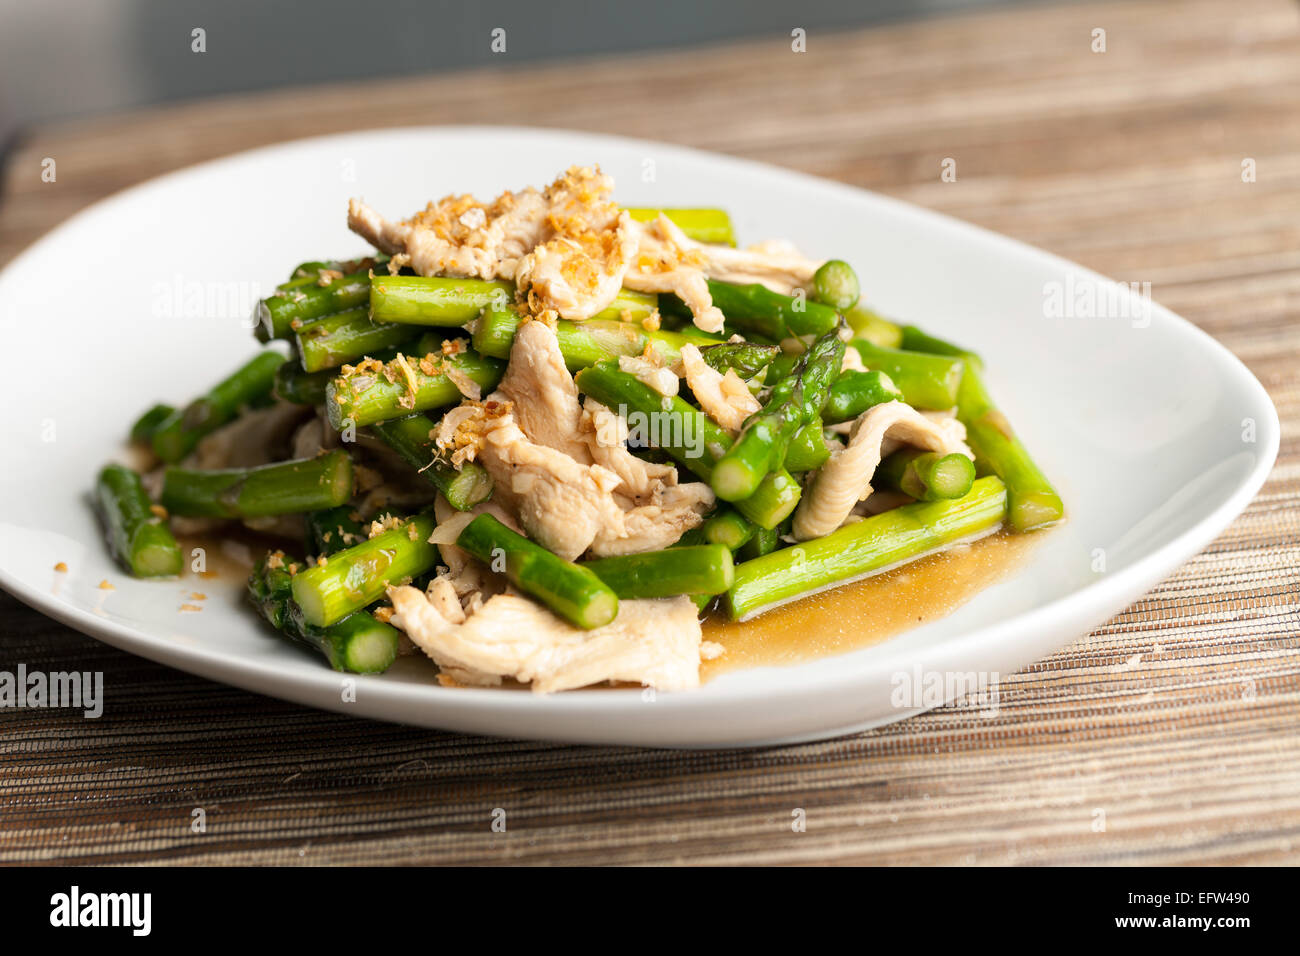 Chicken and Asparagus Stir Fry Stock Photo